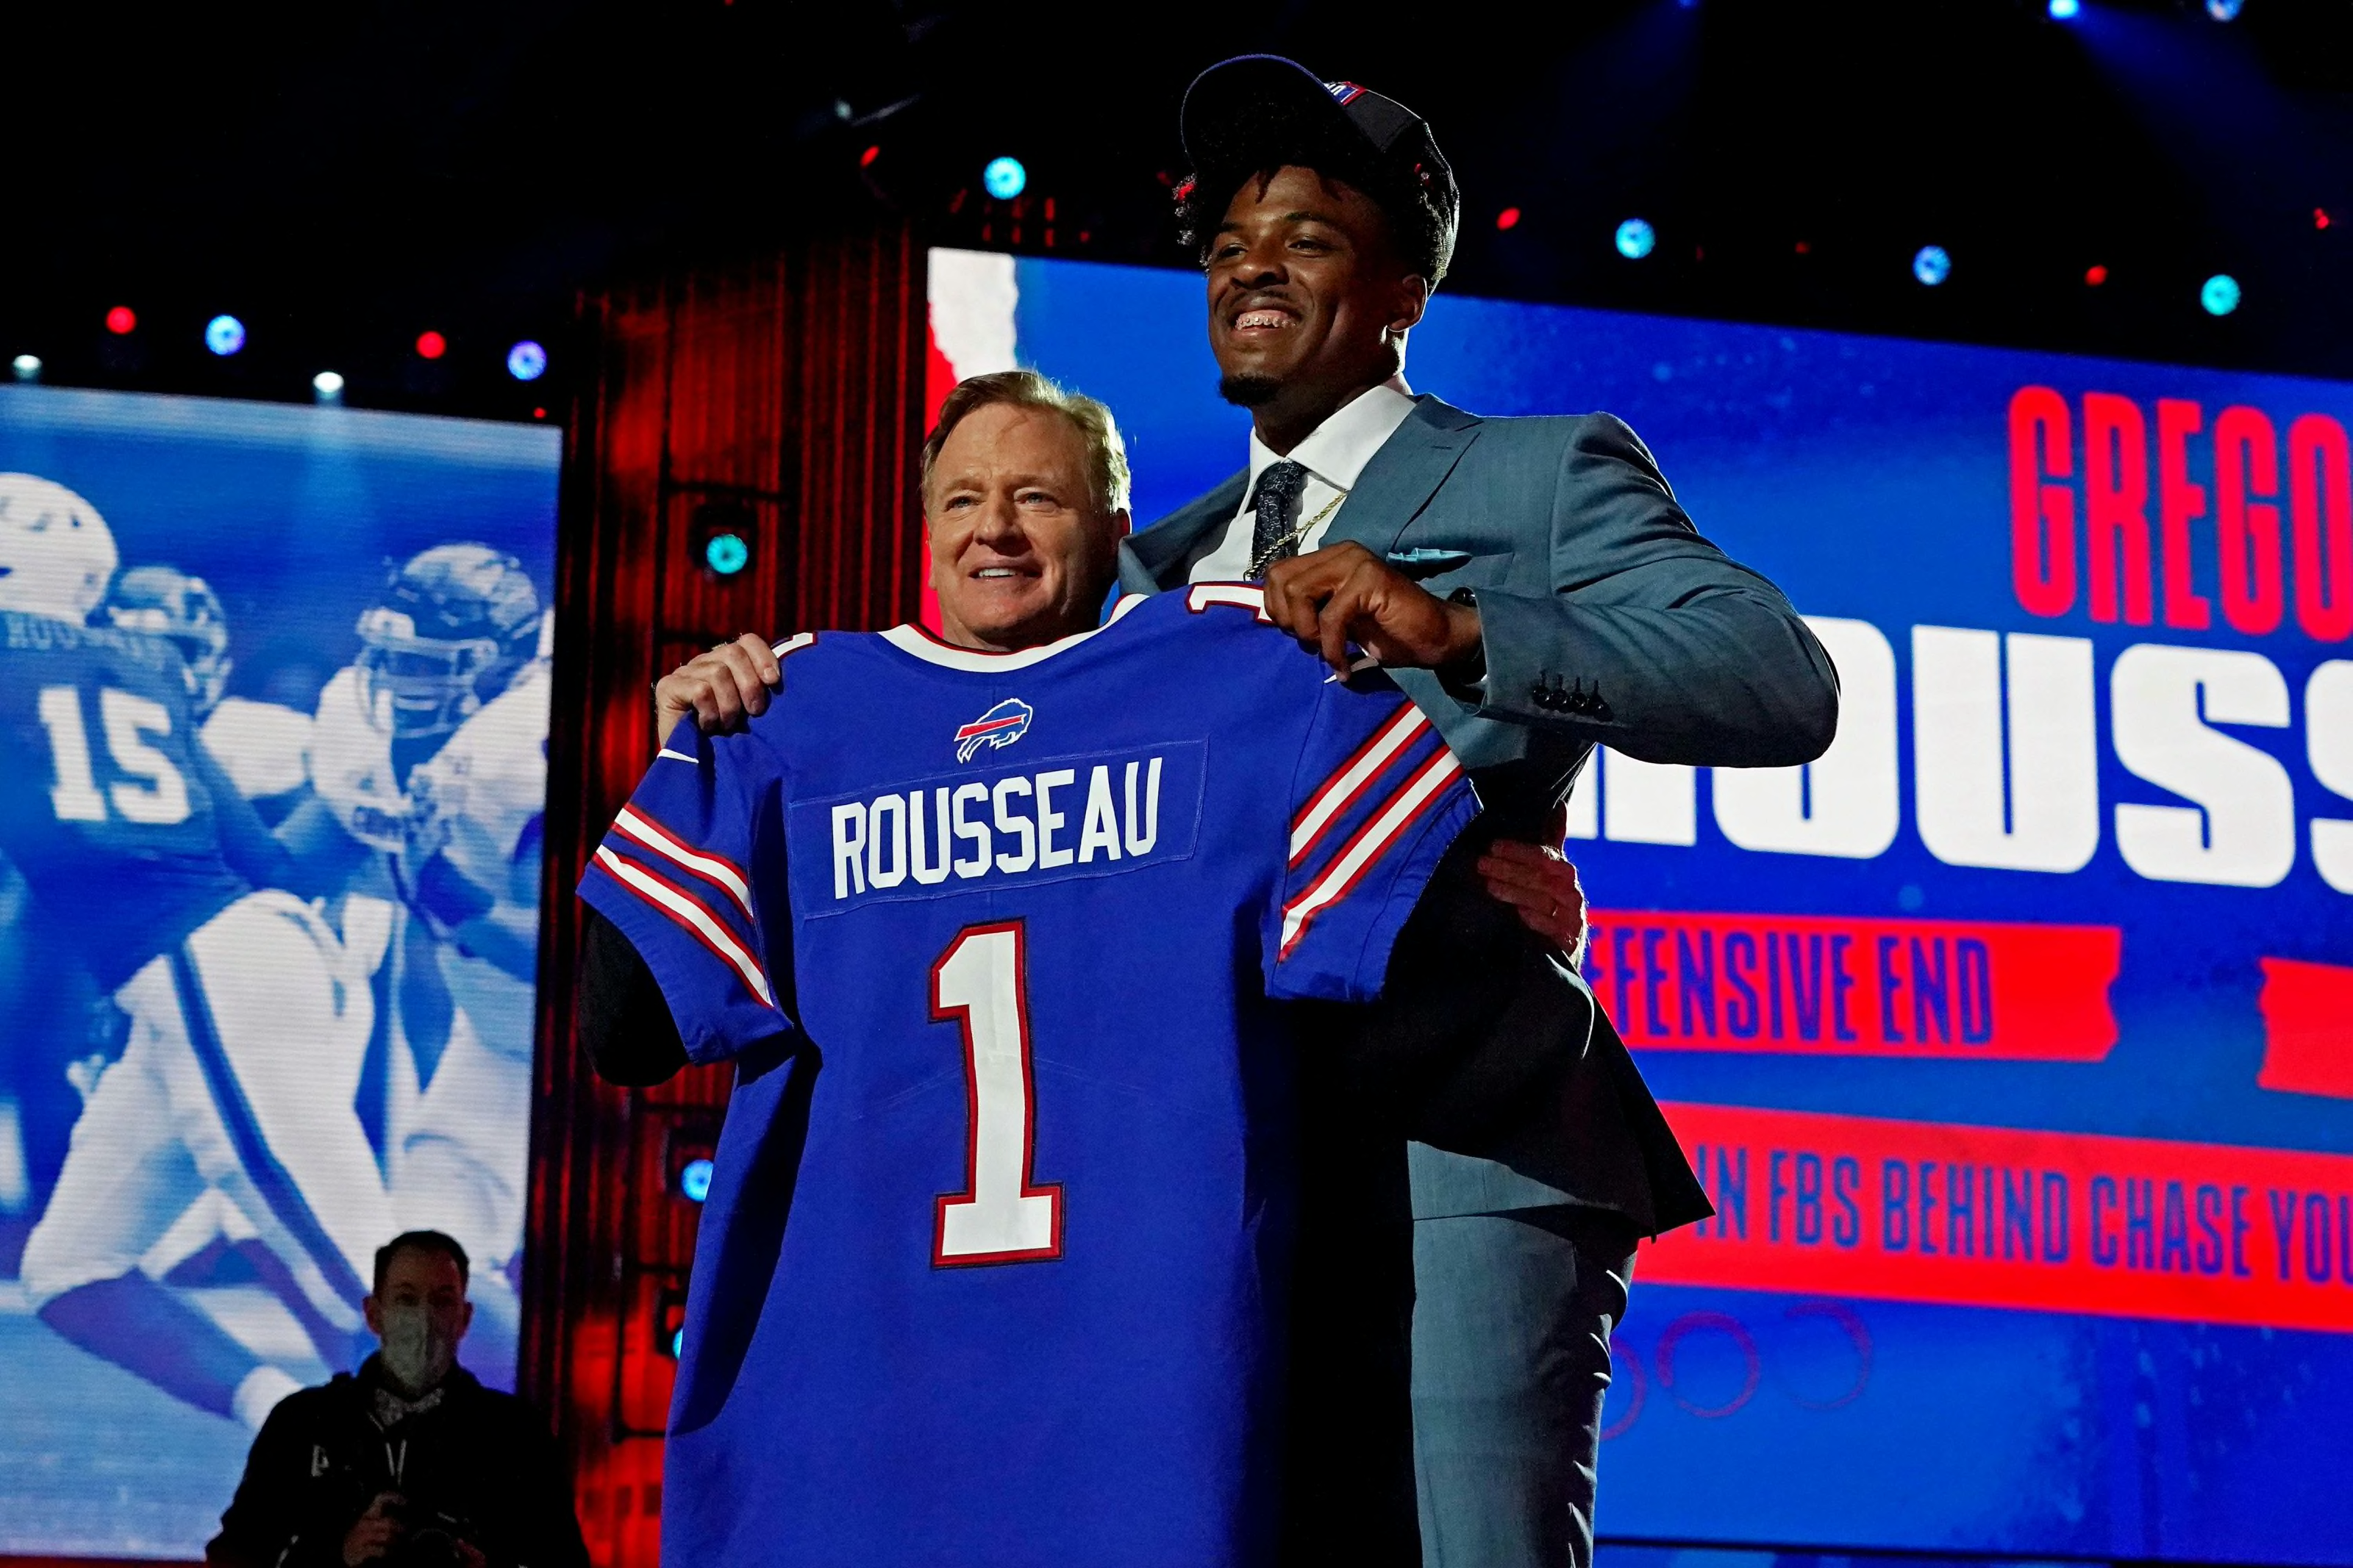 Buffalo Bills: Draft grades for every selection by Buffalo in 2021 NFL